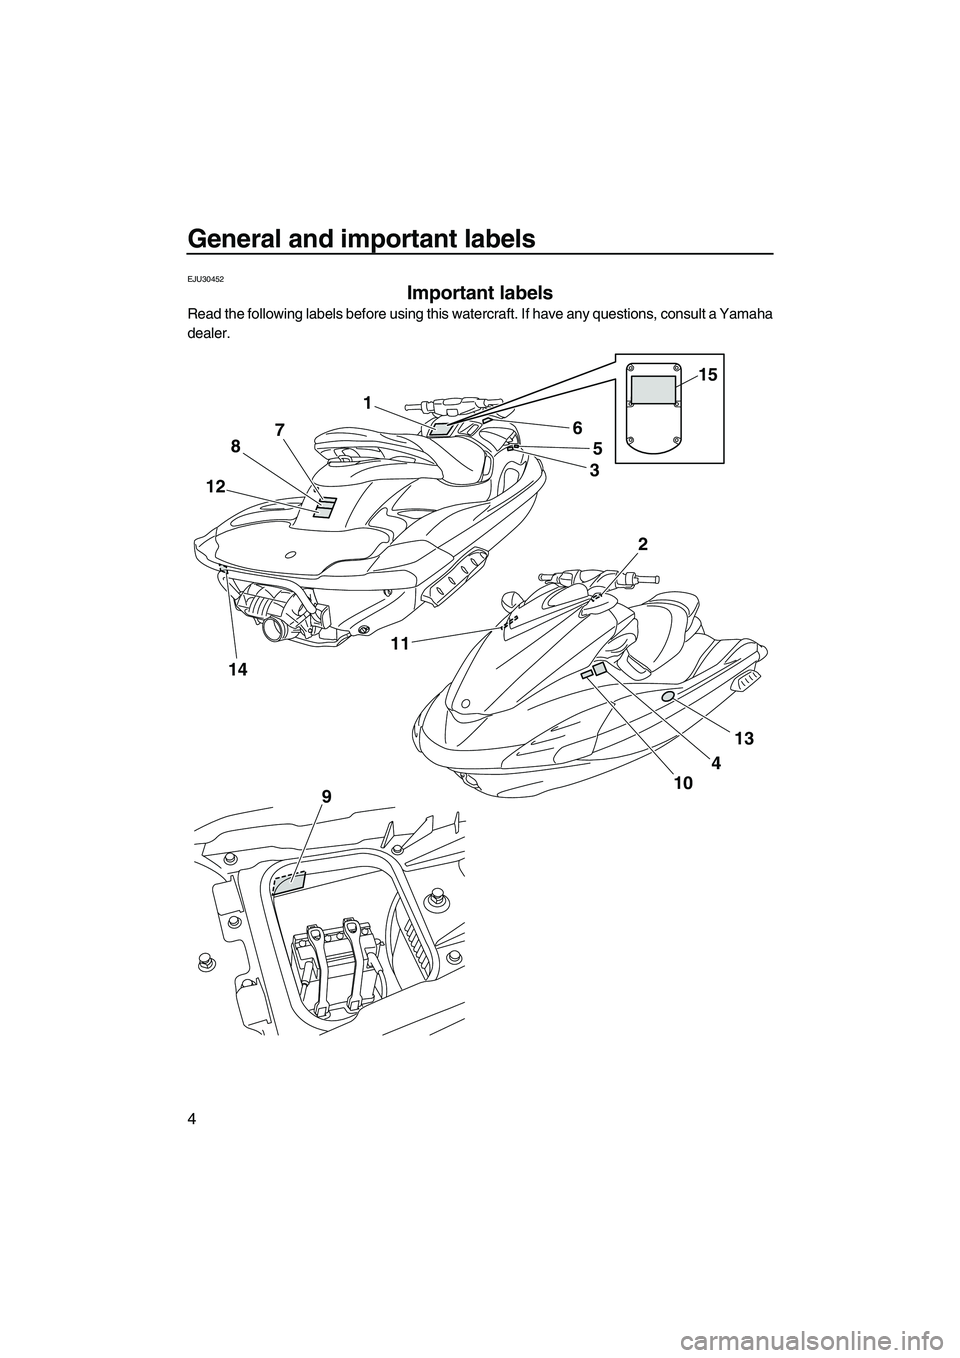 YAMAHA FZS SVHO 2012  Owners Manual General and important labels
4
EJU30452
Important labels 
Read the following labels before using this watercraft. If have any questions, consult a Yamaha
dealer.
1
5
3
4
10 6
87
12
1411
13
2
9
15
UF2C